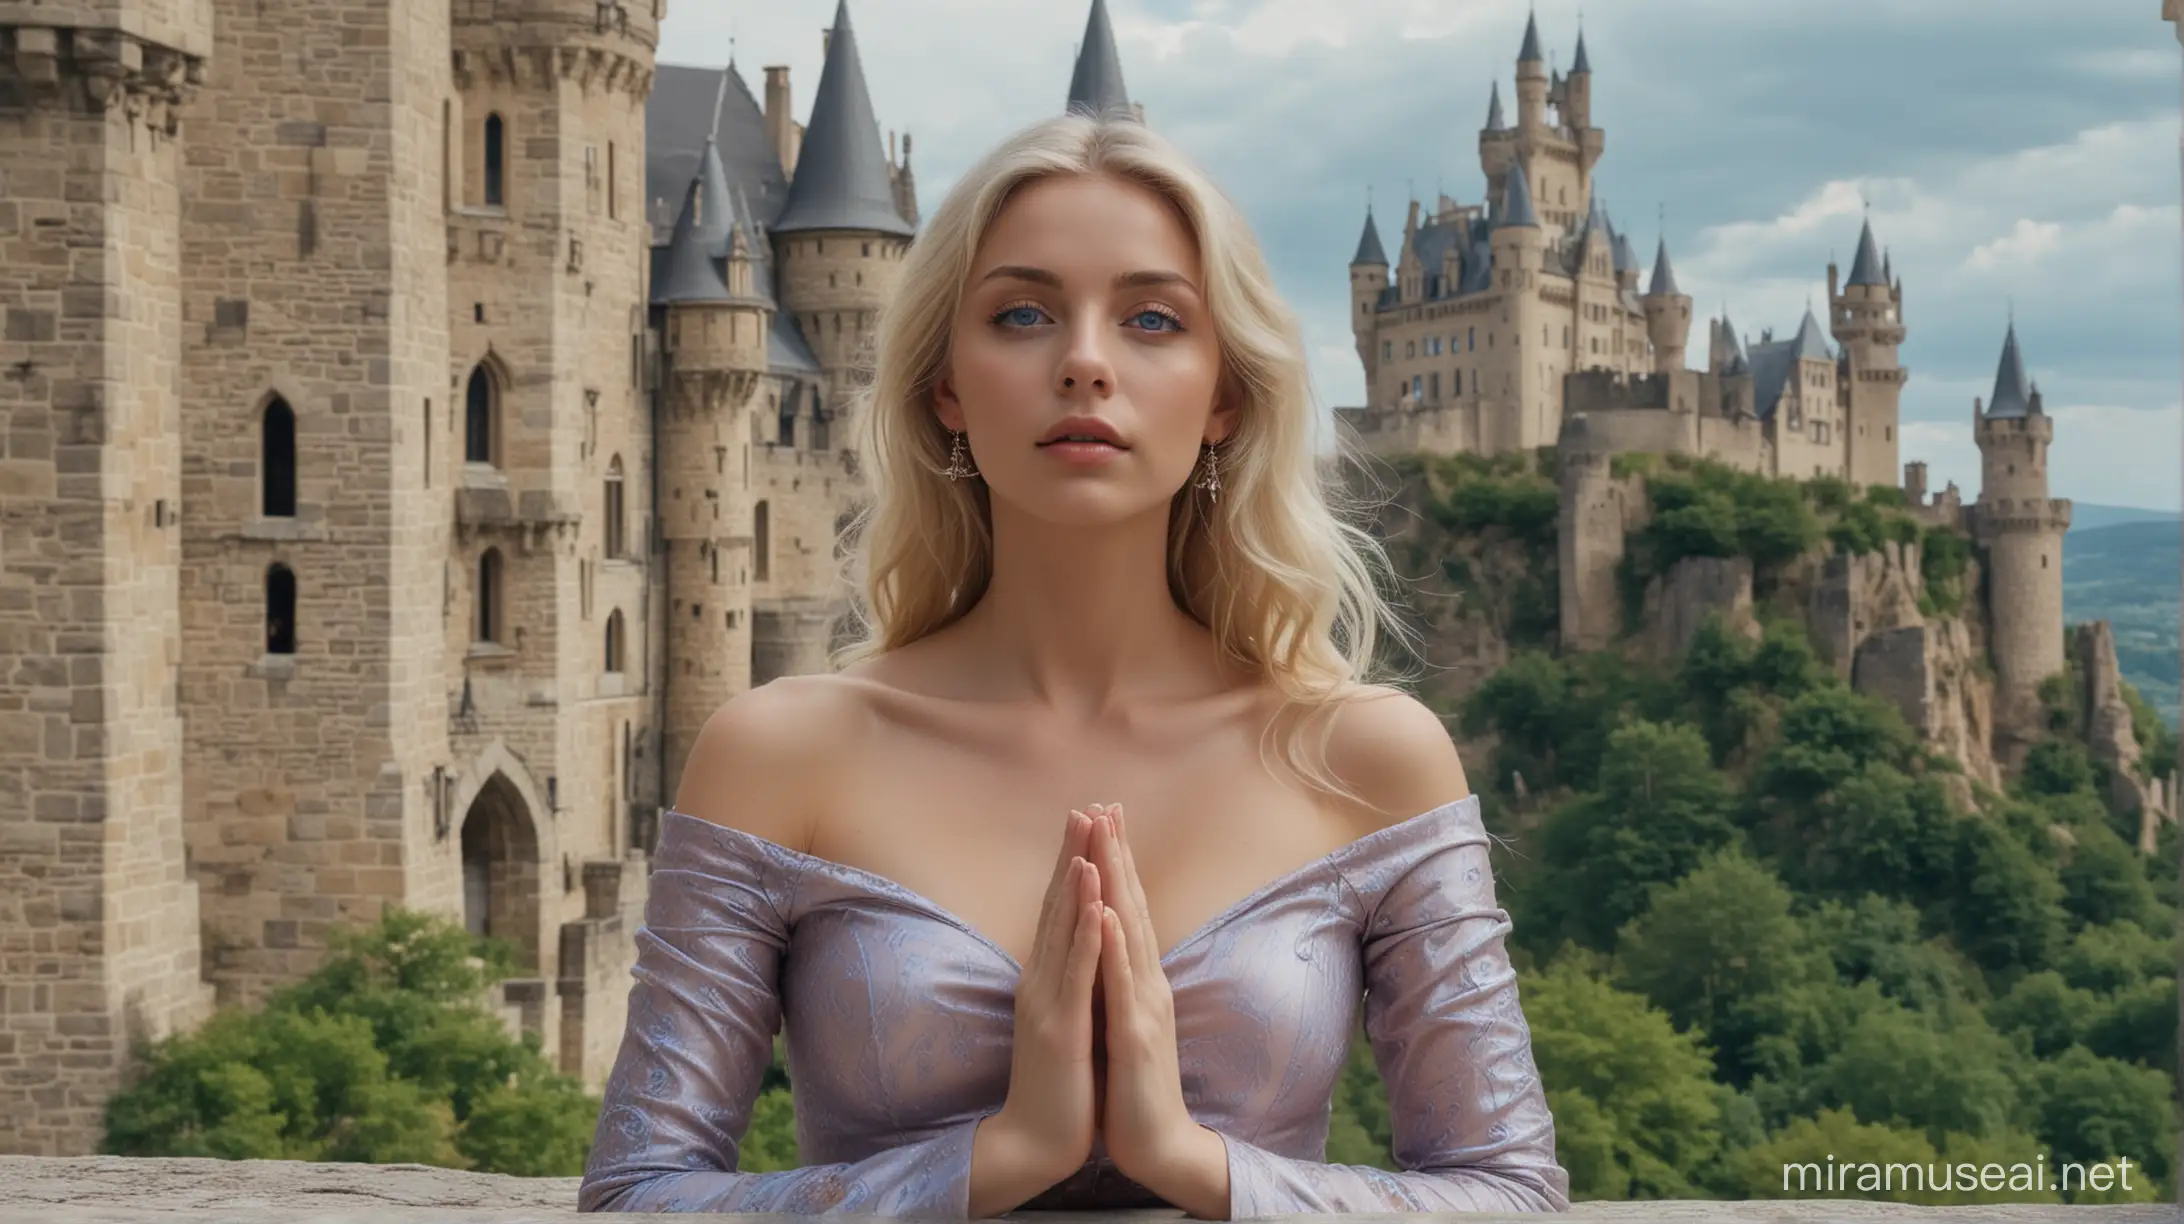 meditating blue eyes blonde lady, castle at the background, with sexy clothes
